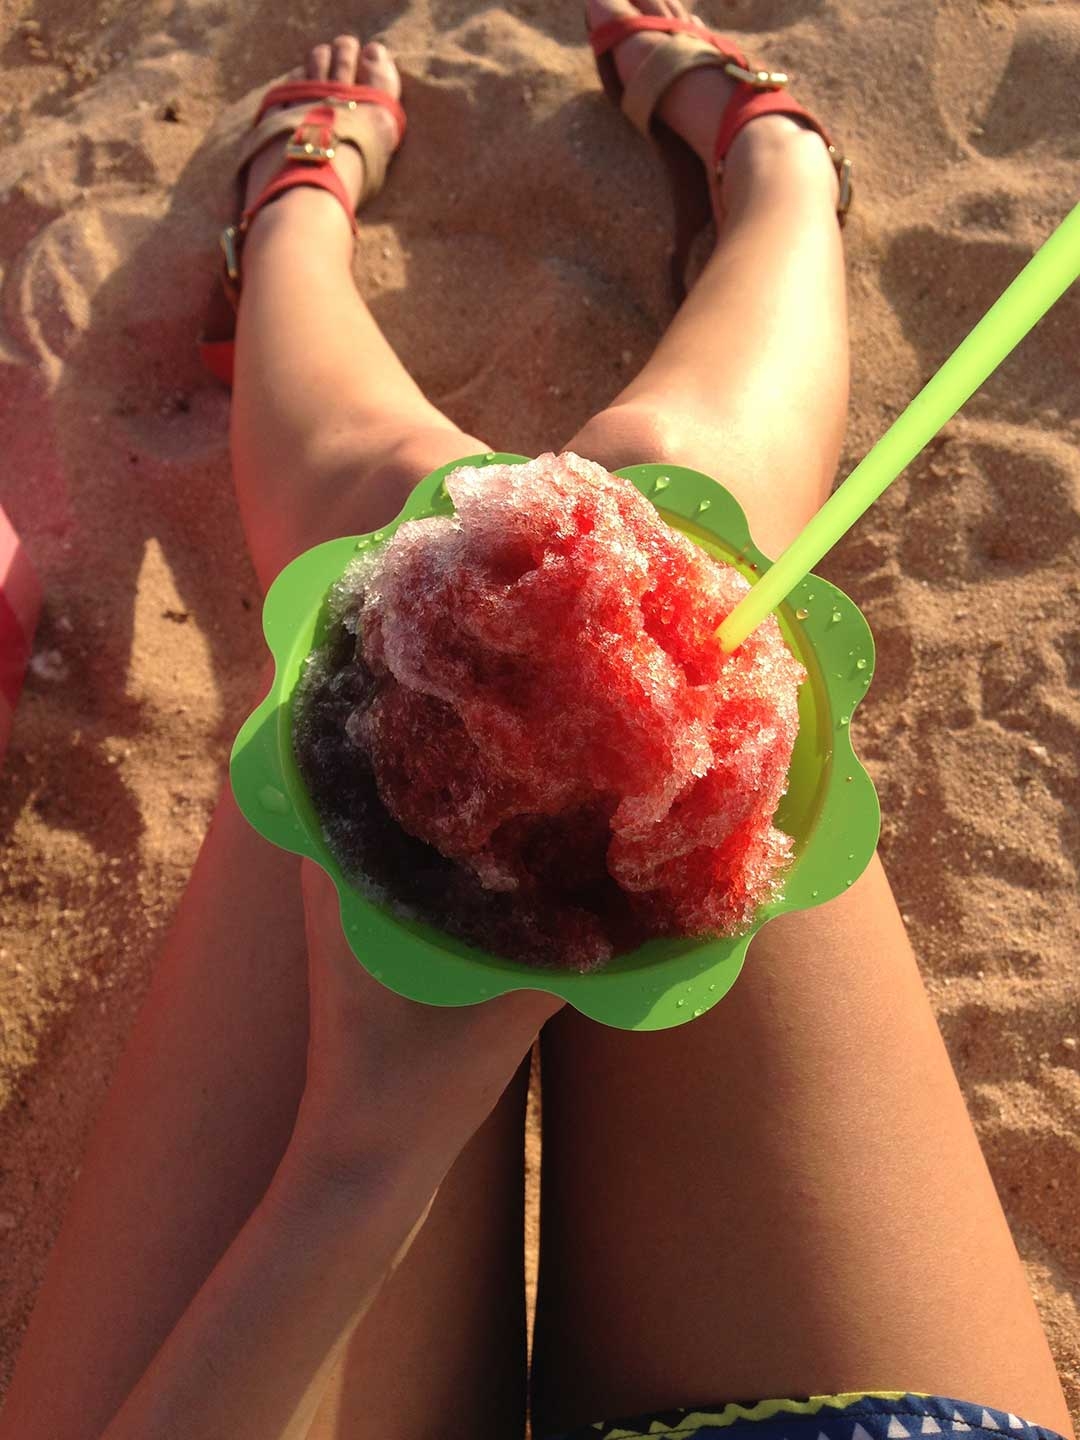 Red and blue shaved ice in a green cup resting on my legs, being enjoyed on Waikiki beach, Hawaii